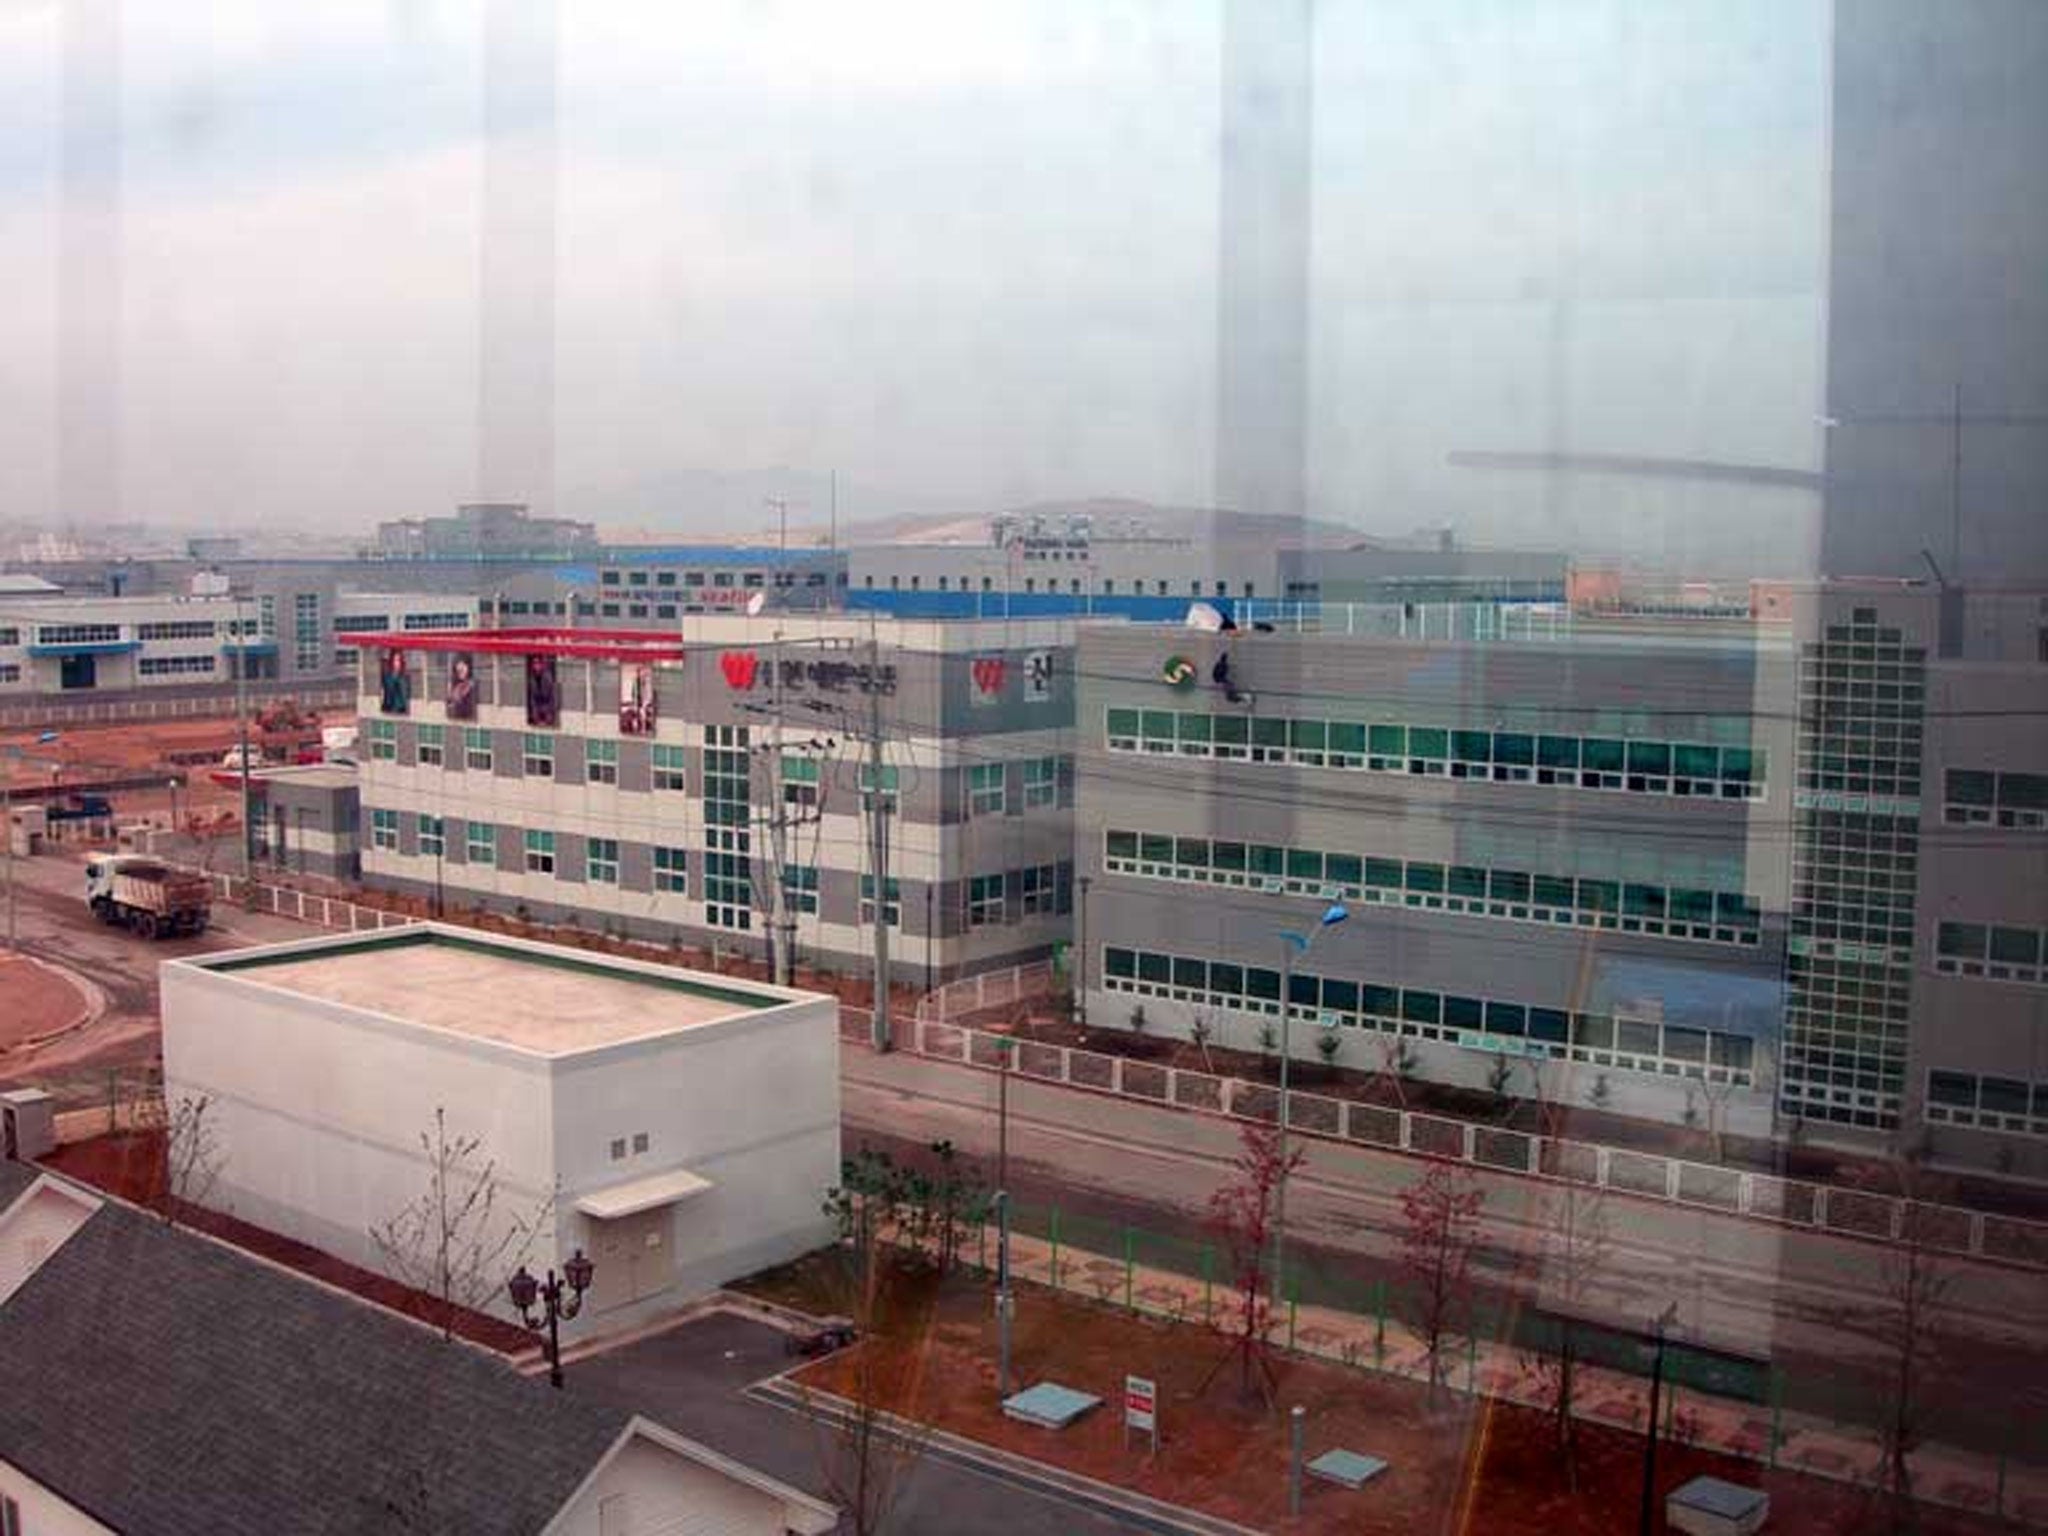 The Kaesong factory complex